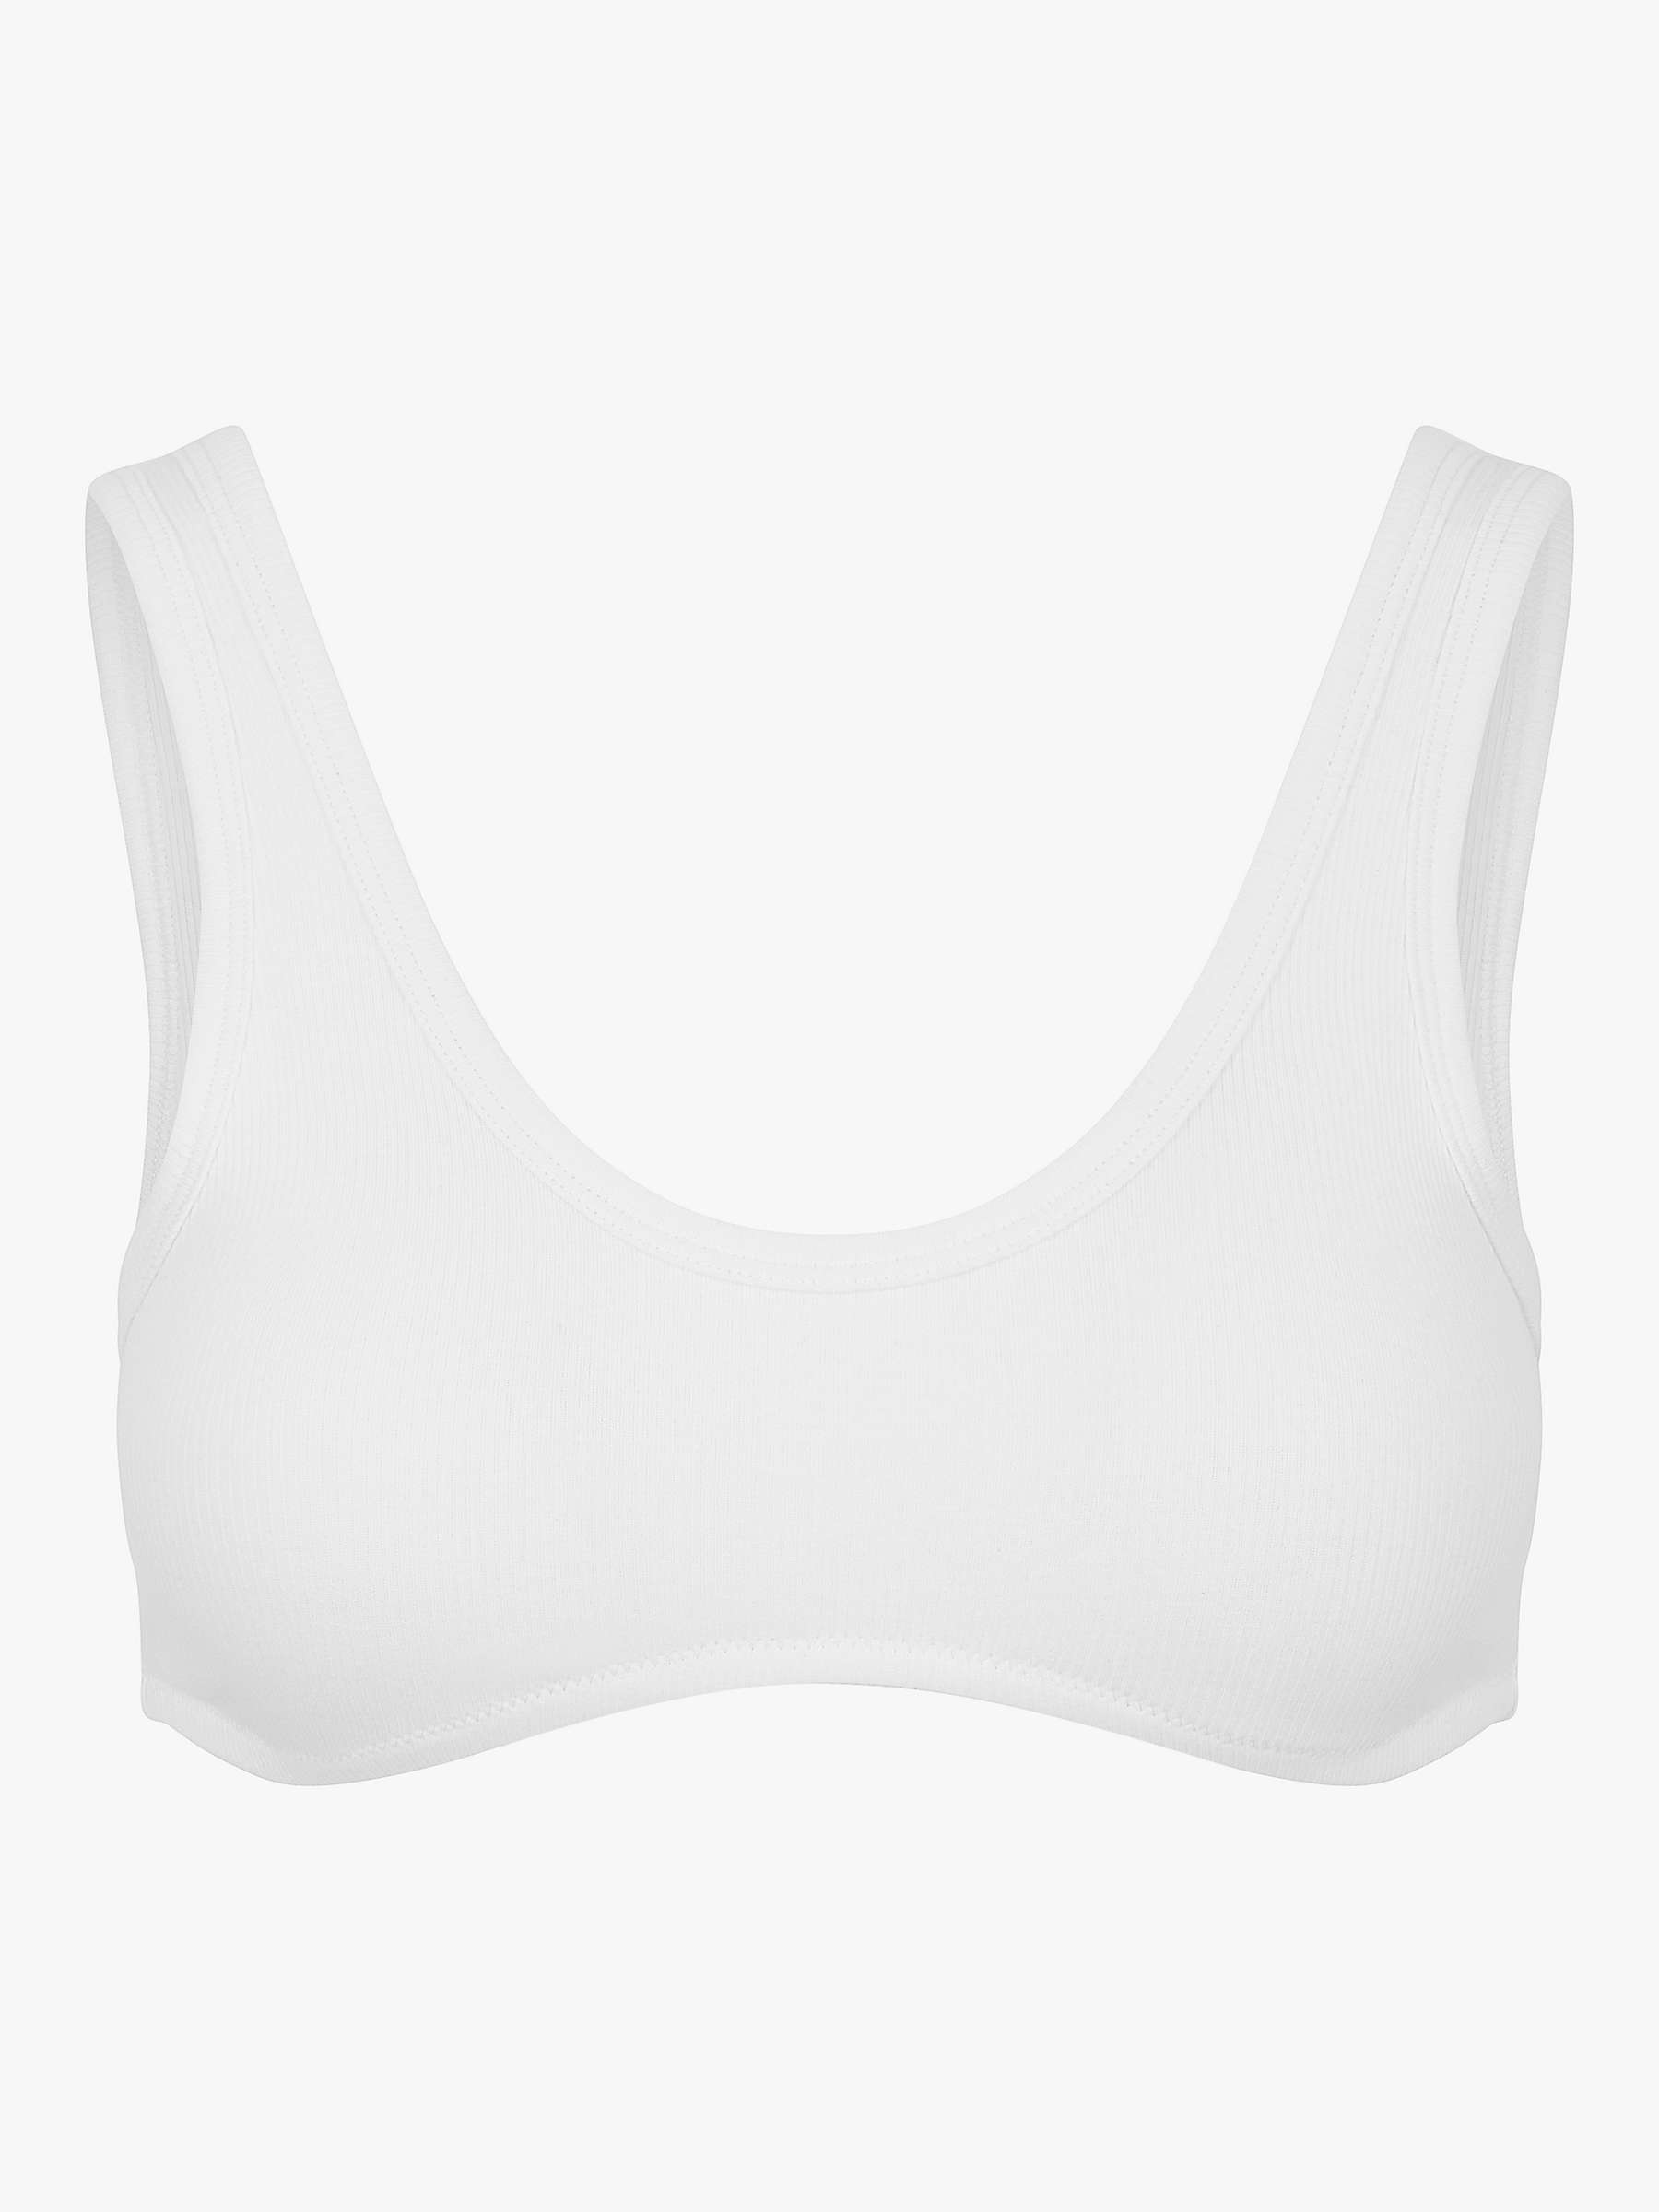 Buy Nudea The Dipped Front Organic Cotton Blend Bralette Online at johnlewis.com